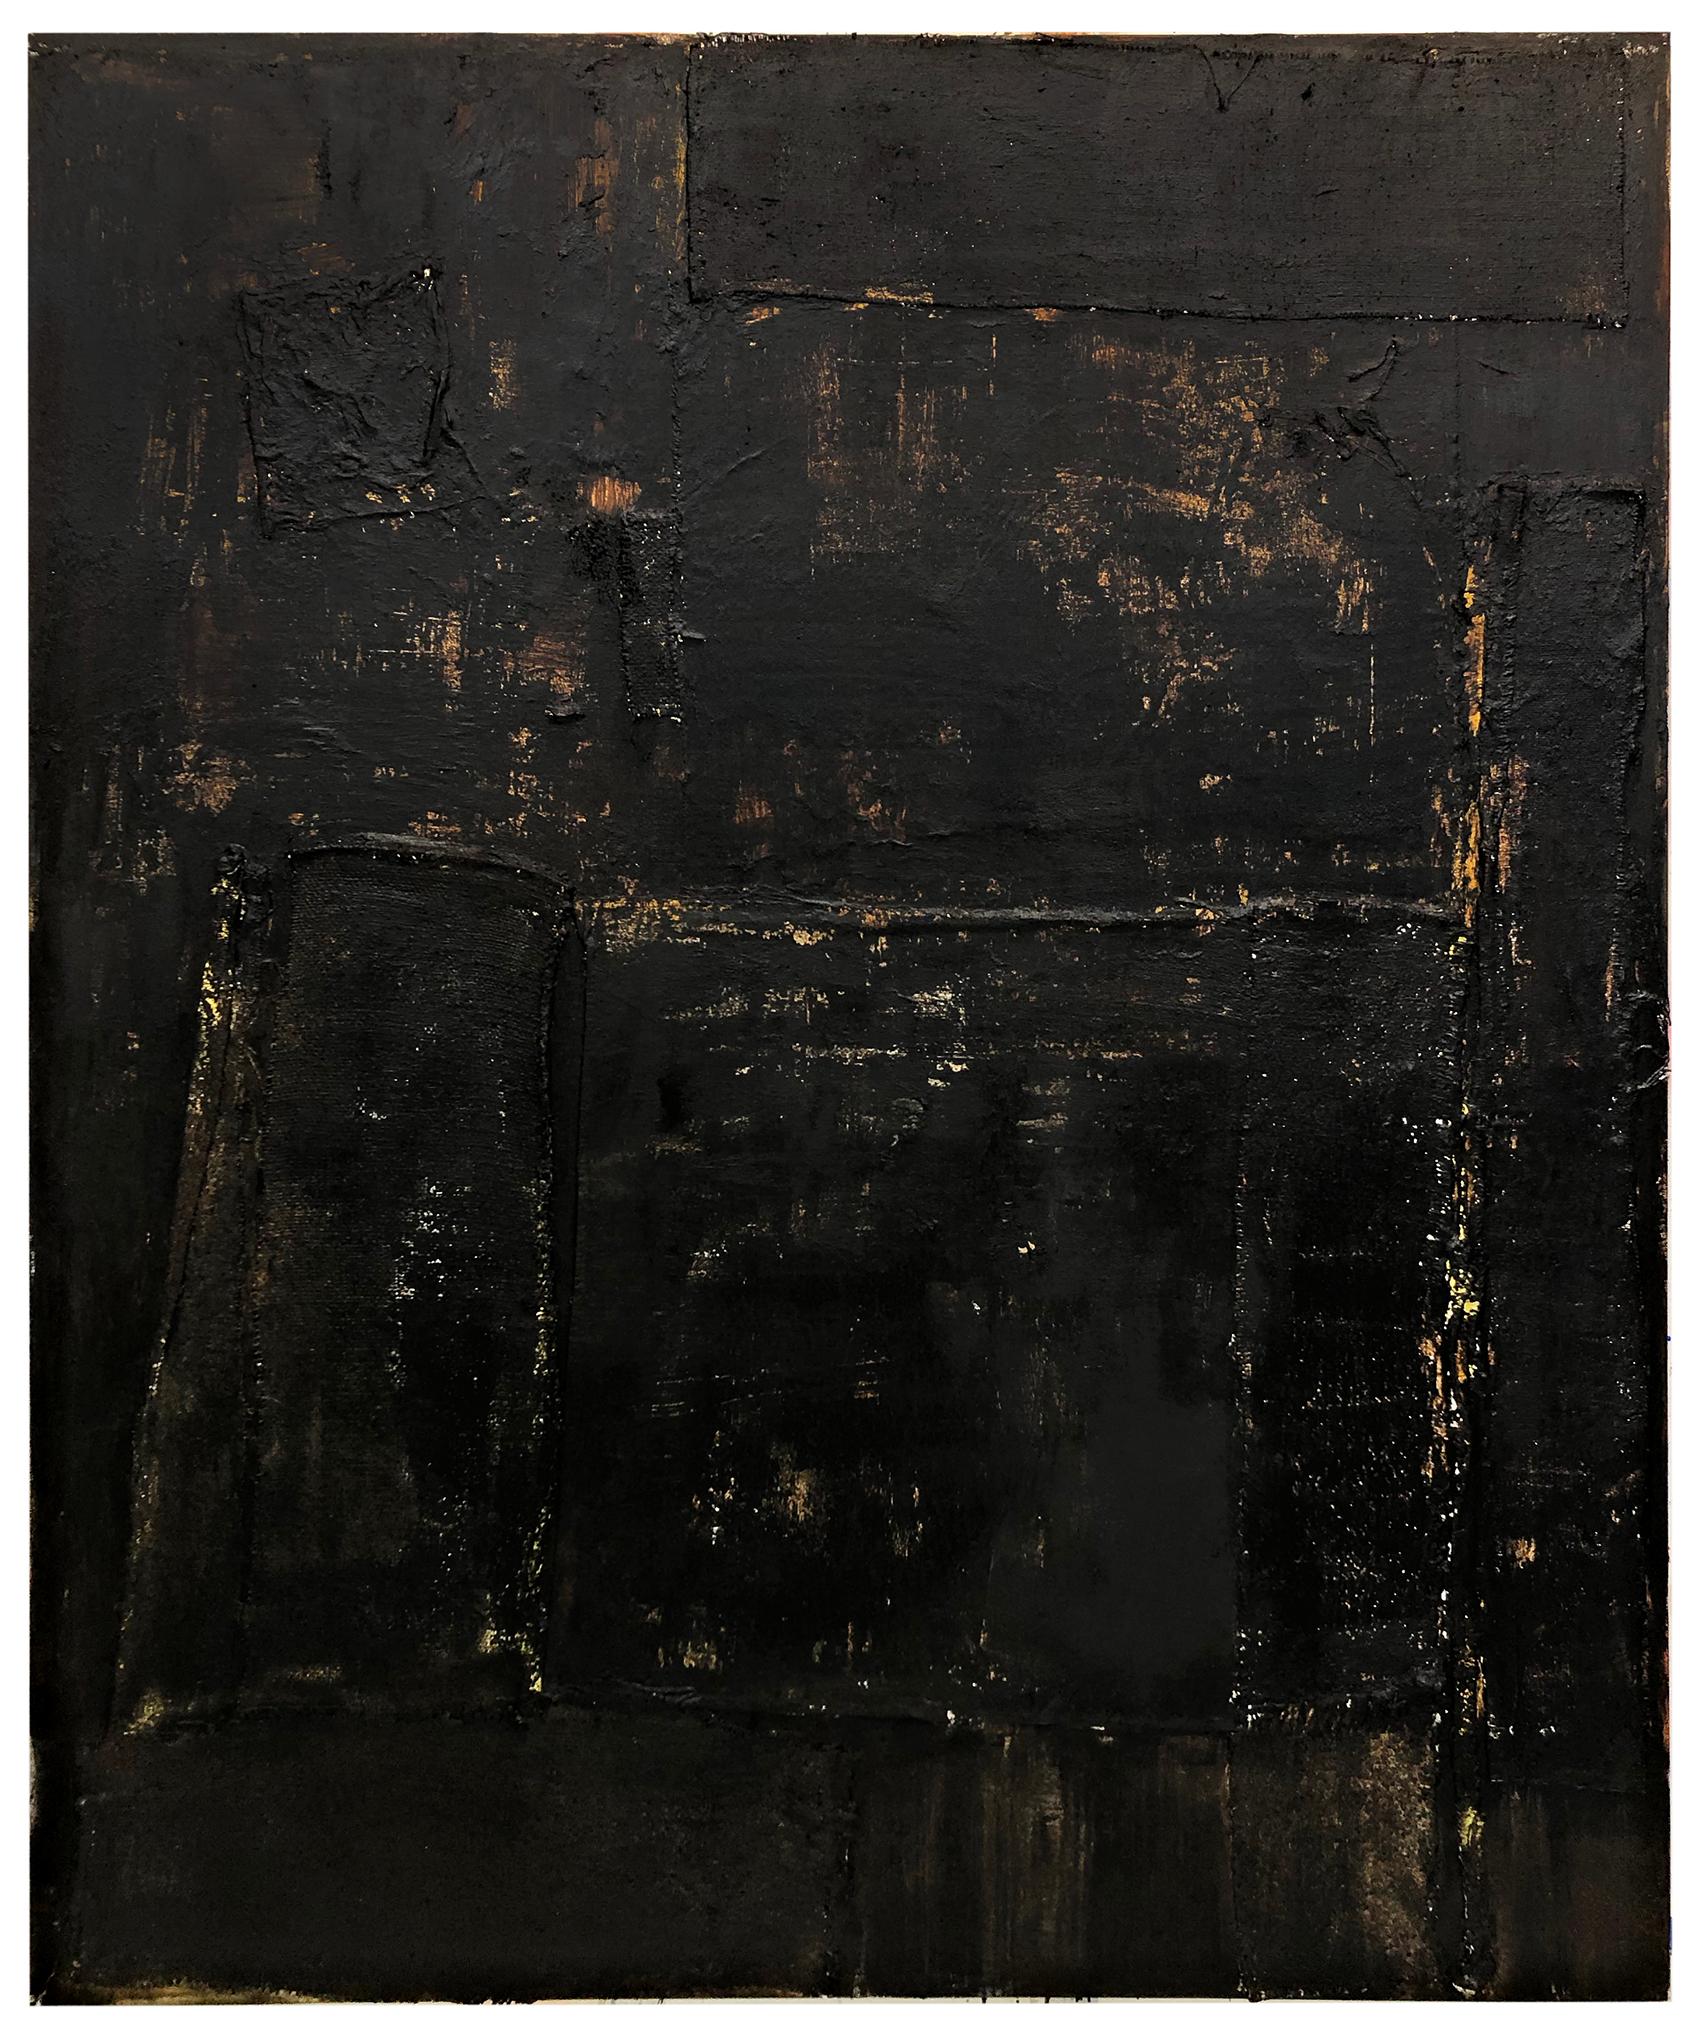 OCBLK00010122
Oil, Bitumen, Sand, Mica, Collage On Canvas
72" X 60"

I am a visual artist whose work investigates small and large -scale abstraction primarily in the medium of painting employing the use of industrial materials:enamel paint,  jute,